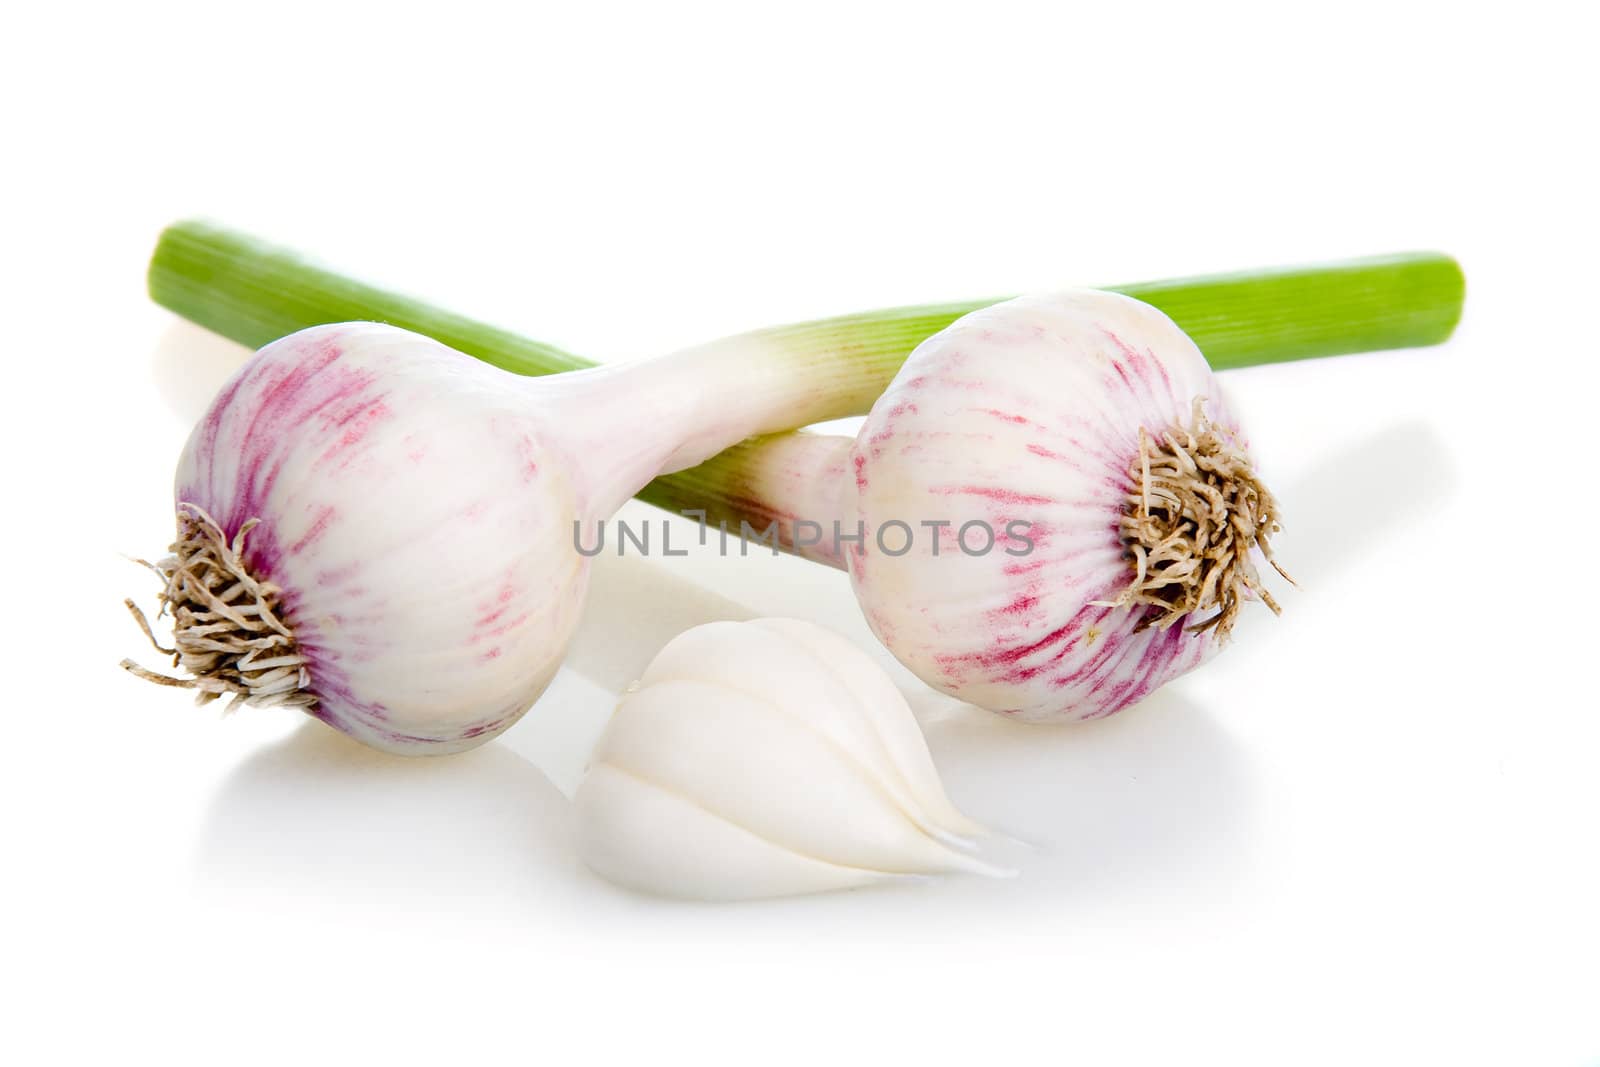 Garlic Vegetable and Cloves Isolated on White Background 